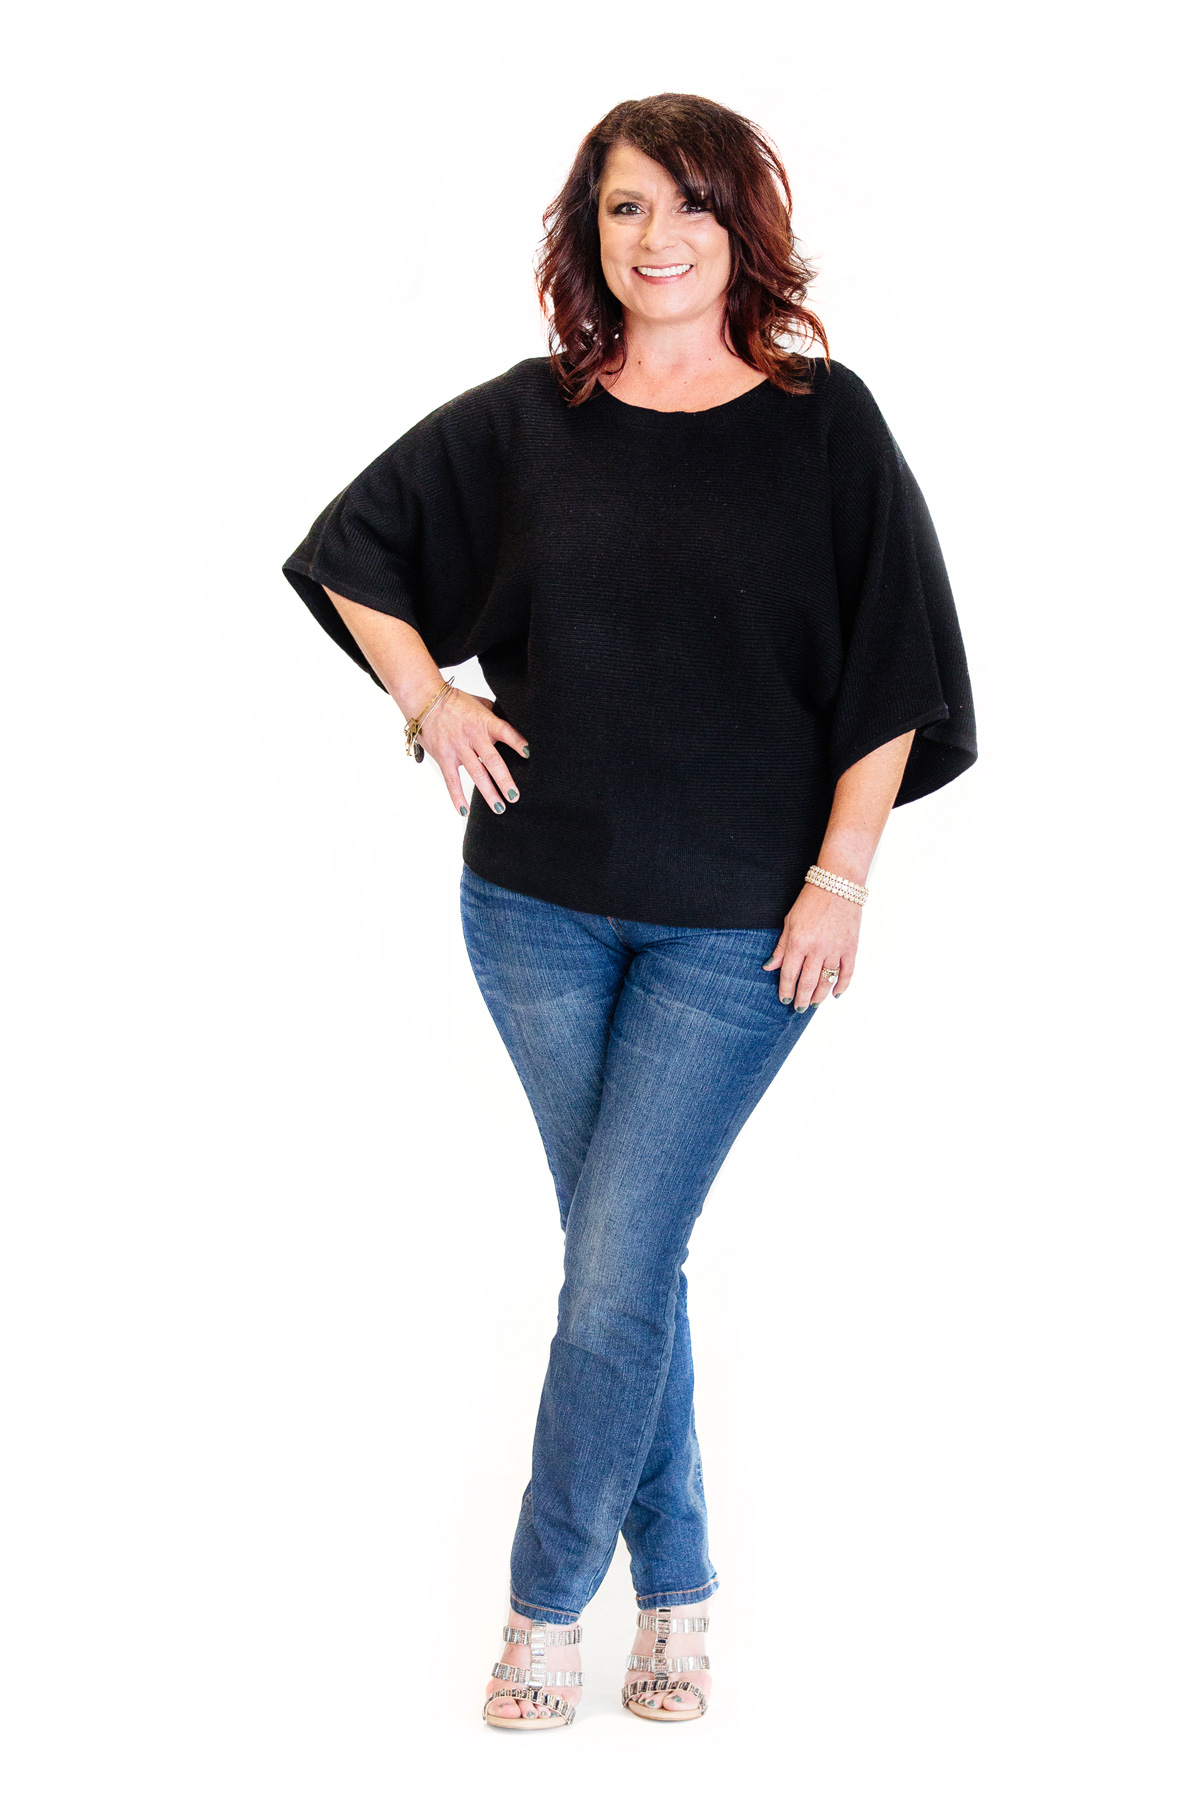 B105 radio personality Chelsie wearing a black top and jeans, for her Healthspirations blog.